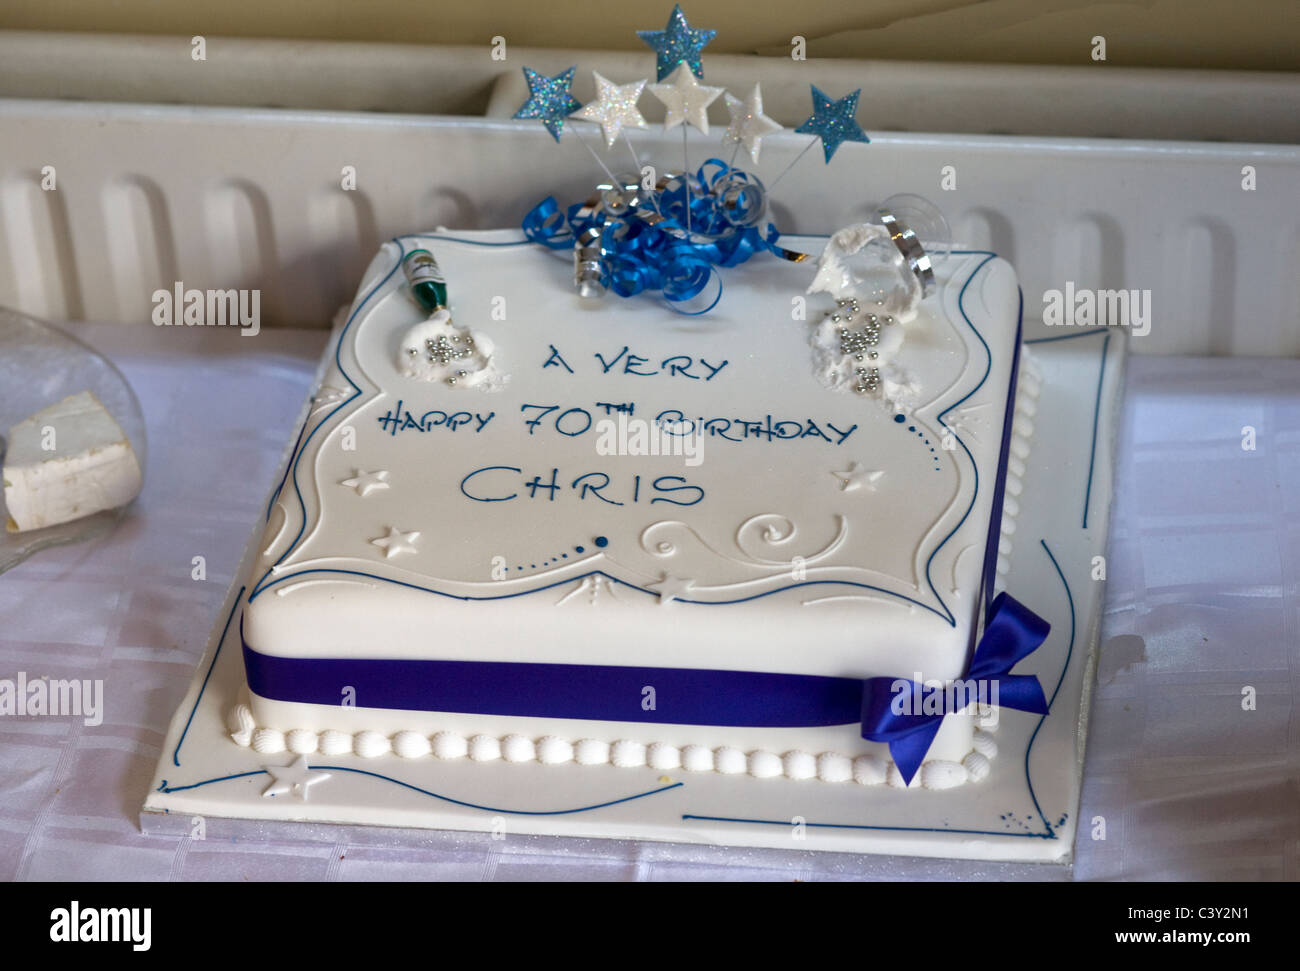 Birthday cake, with white icing and blue ribbon for a very happy 70th birthday for Chris Stock Photo